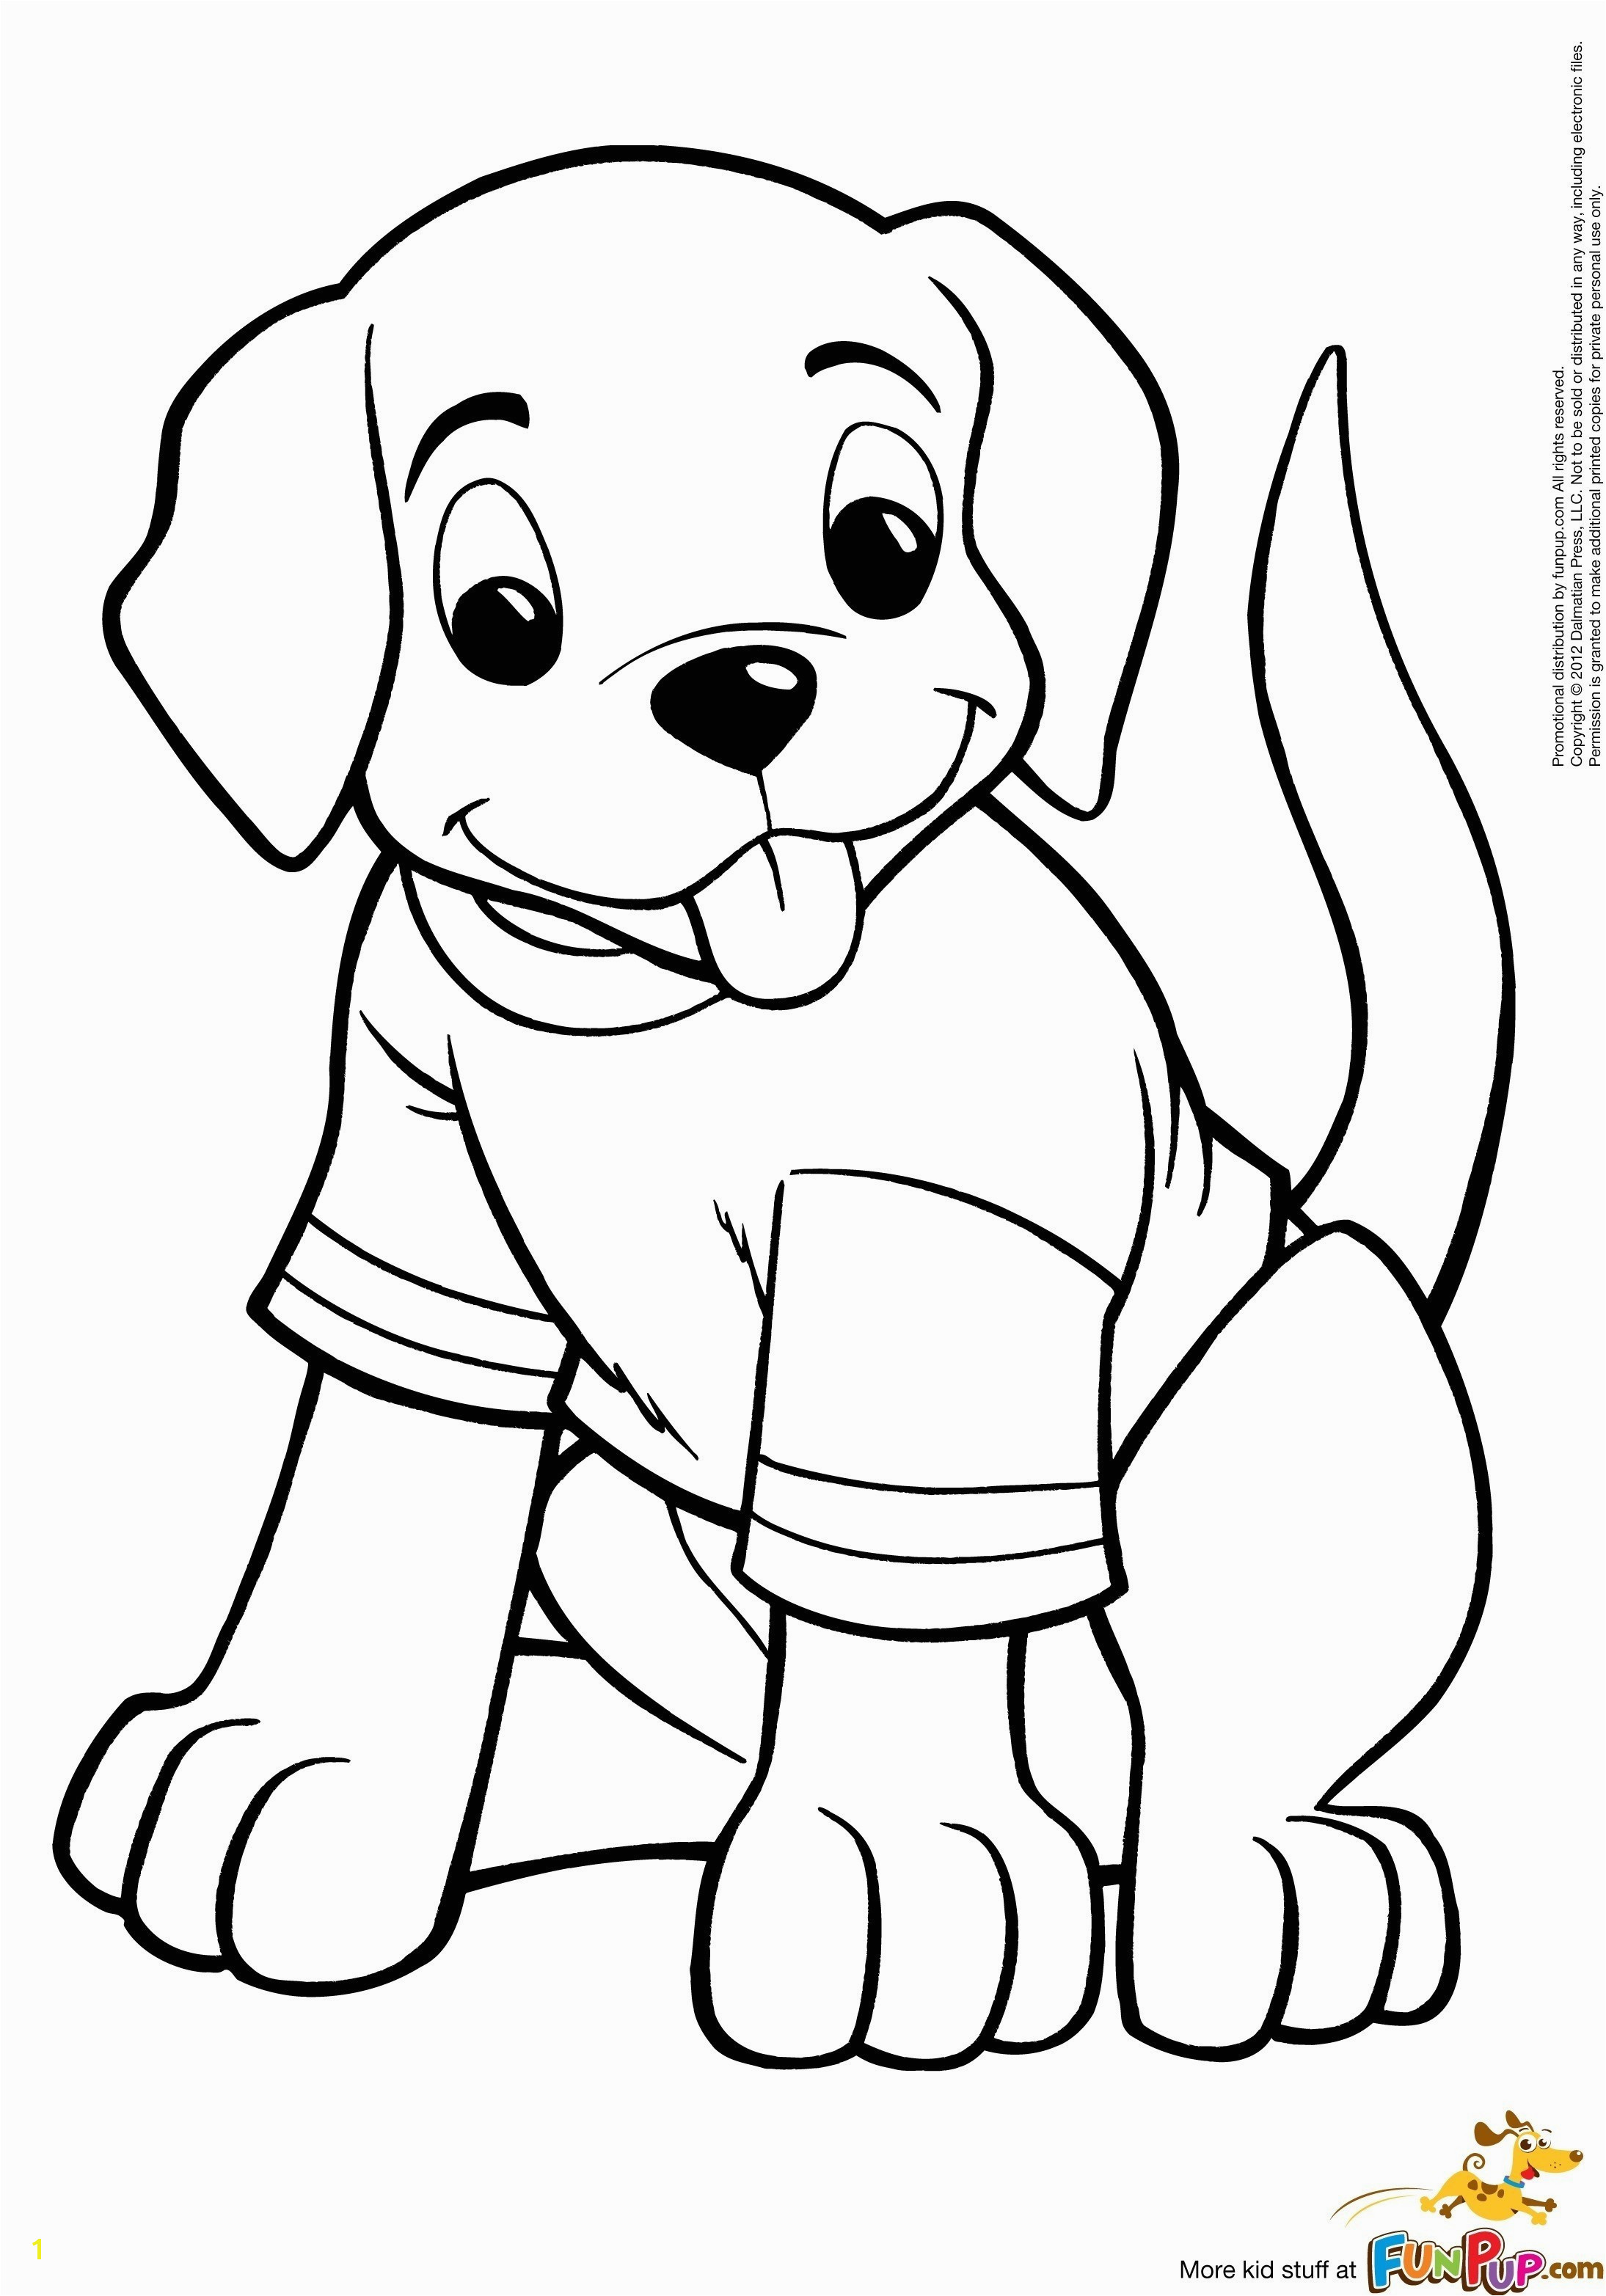 Jellyfish Coloring Pages Beautiful Coloring Pages Animals Lovely Puppy Coloring 0d